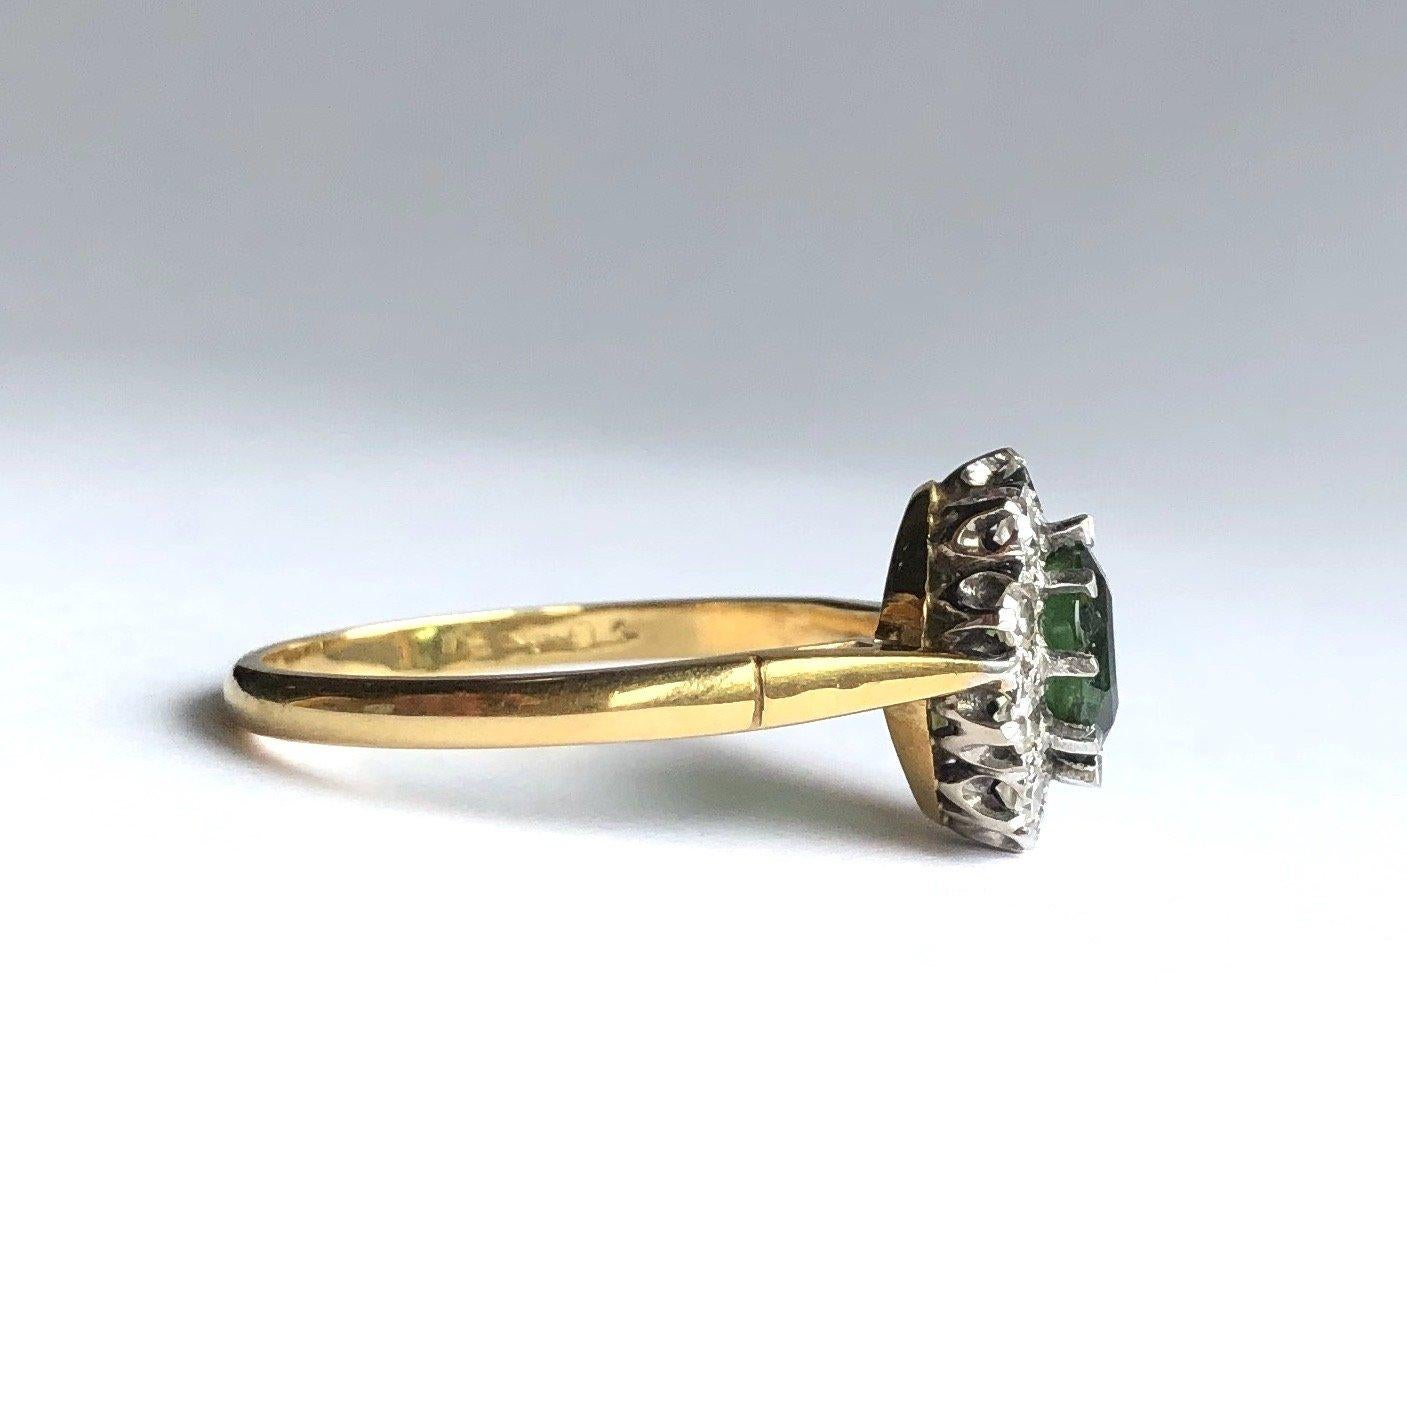 The tourmaline in this ring is such a beautiful colour and thee cut makes the stone look like it is never ending, almost like a hall of mirrors! The tourmaline measures 75pts and the diamonds total approx 50pts. 

Ring Size: Q 1/2 or 8 1/4 
Cluster